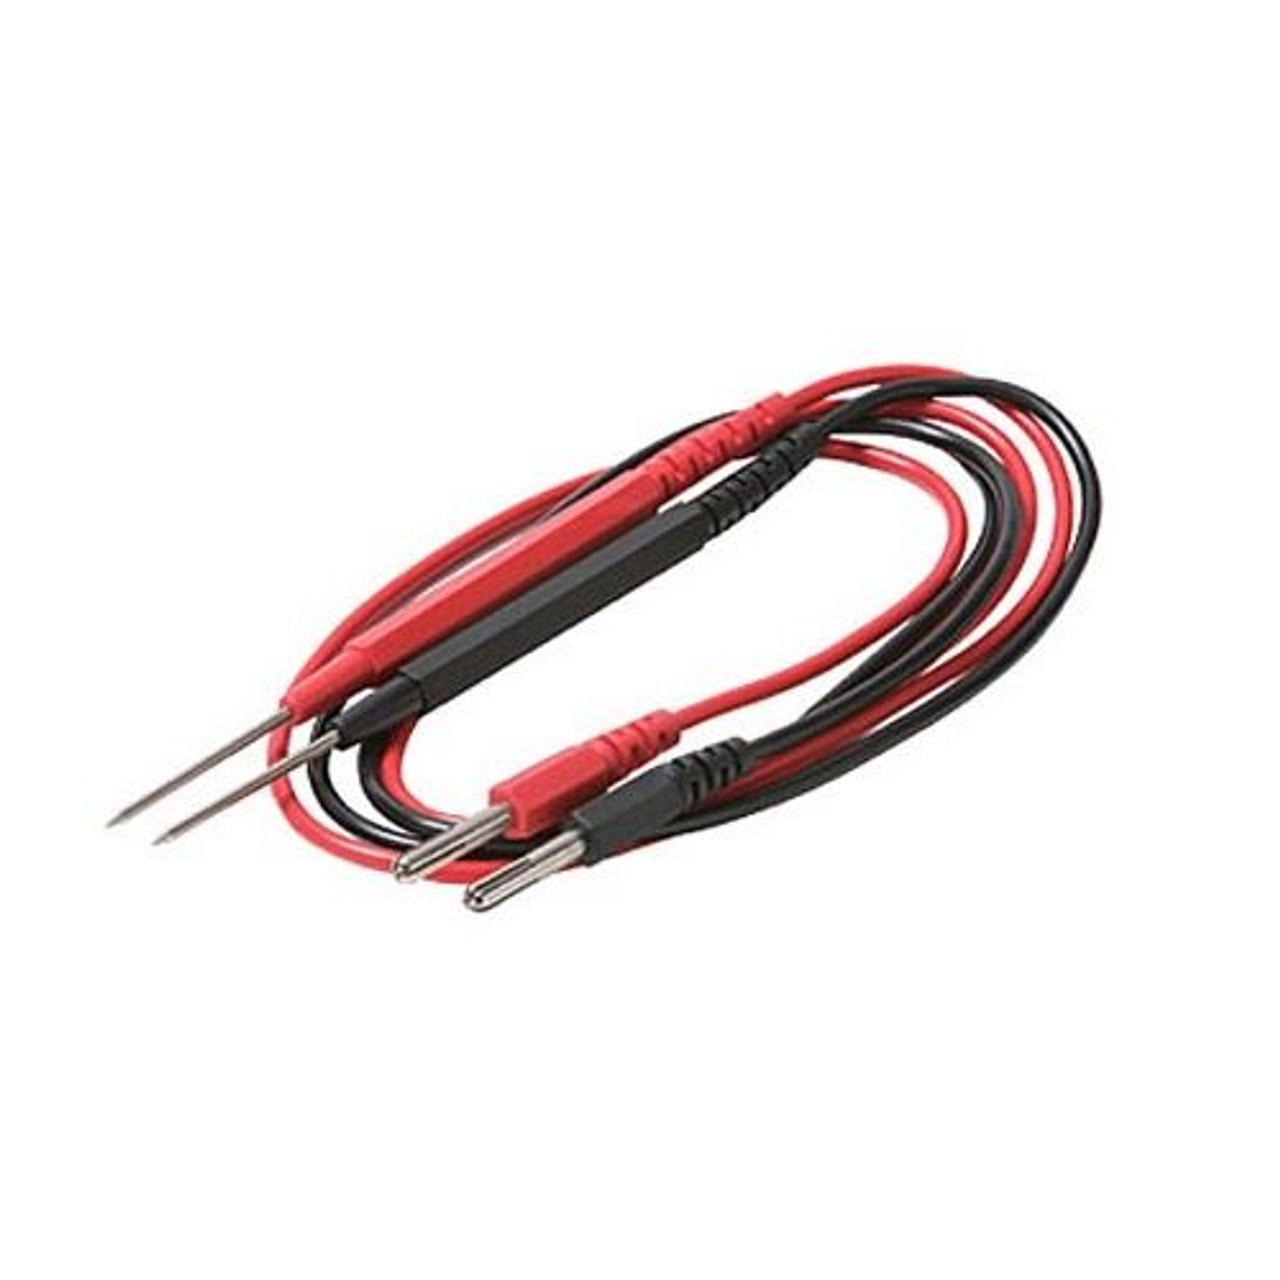 Eagle Test Probes 3' FT Multi Meter Banana Plugs Black Red Pair REPL Test Leads Banana Plugs to Test Probes 3' FT Length, Heavy Duty Design